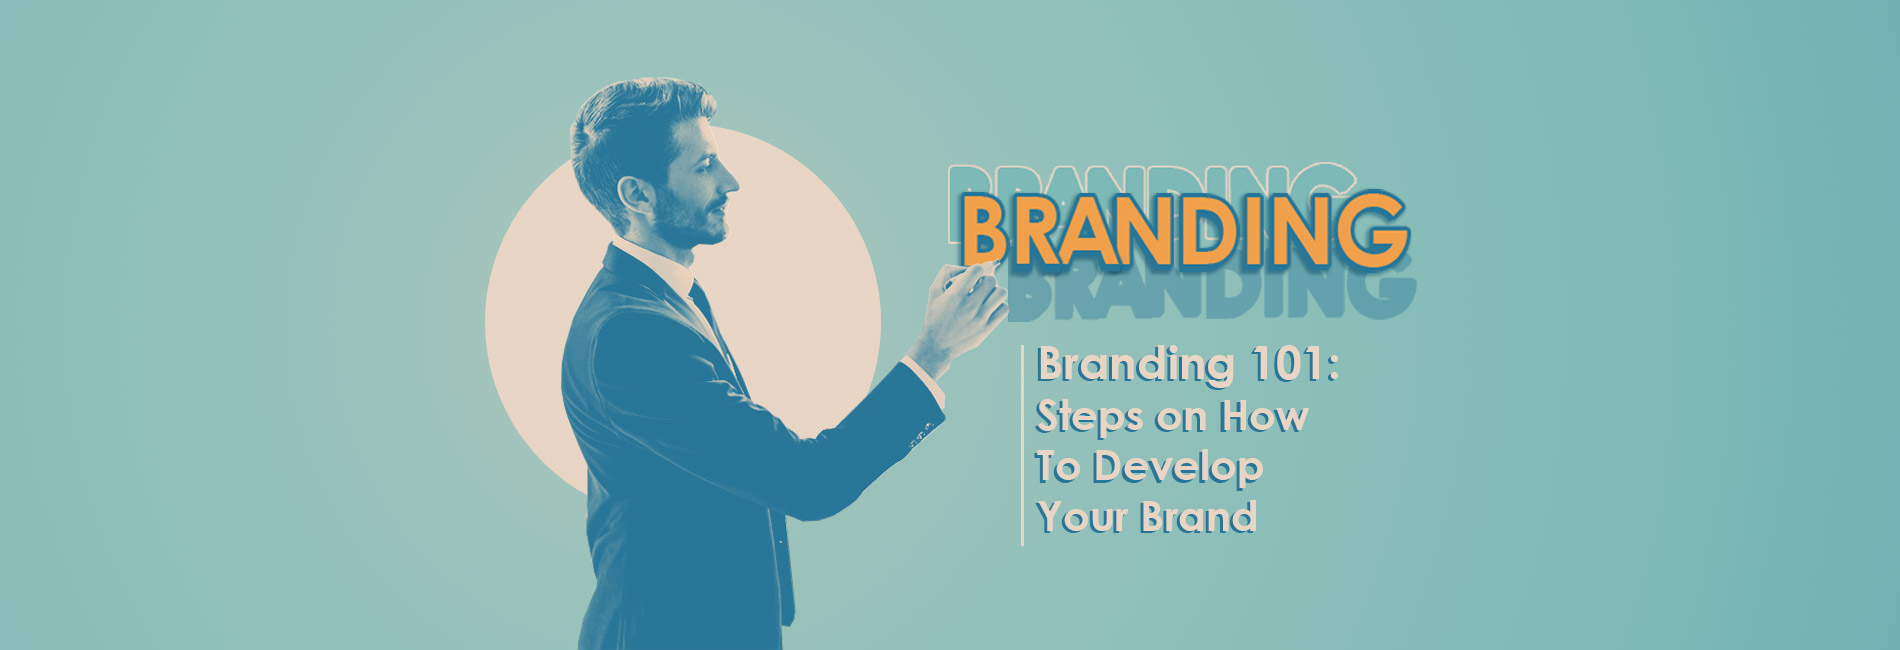 How to Build a Brand: Branding 101